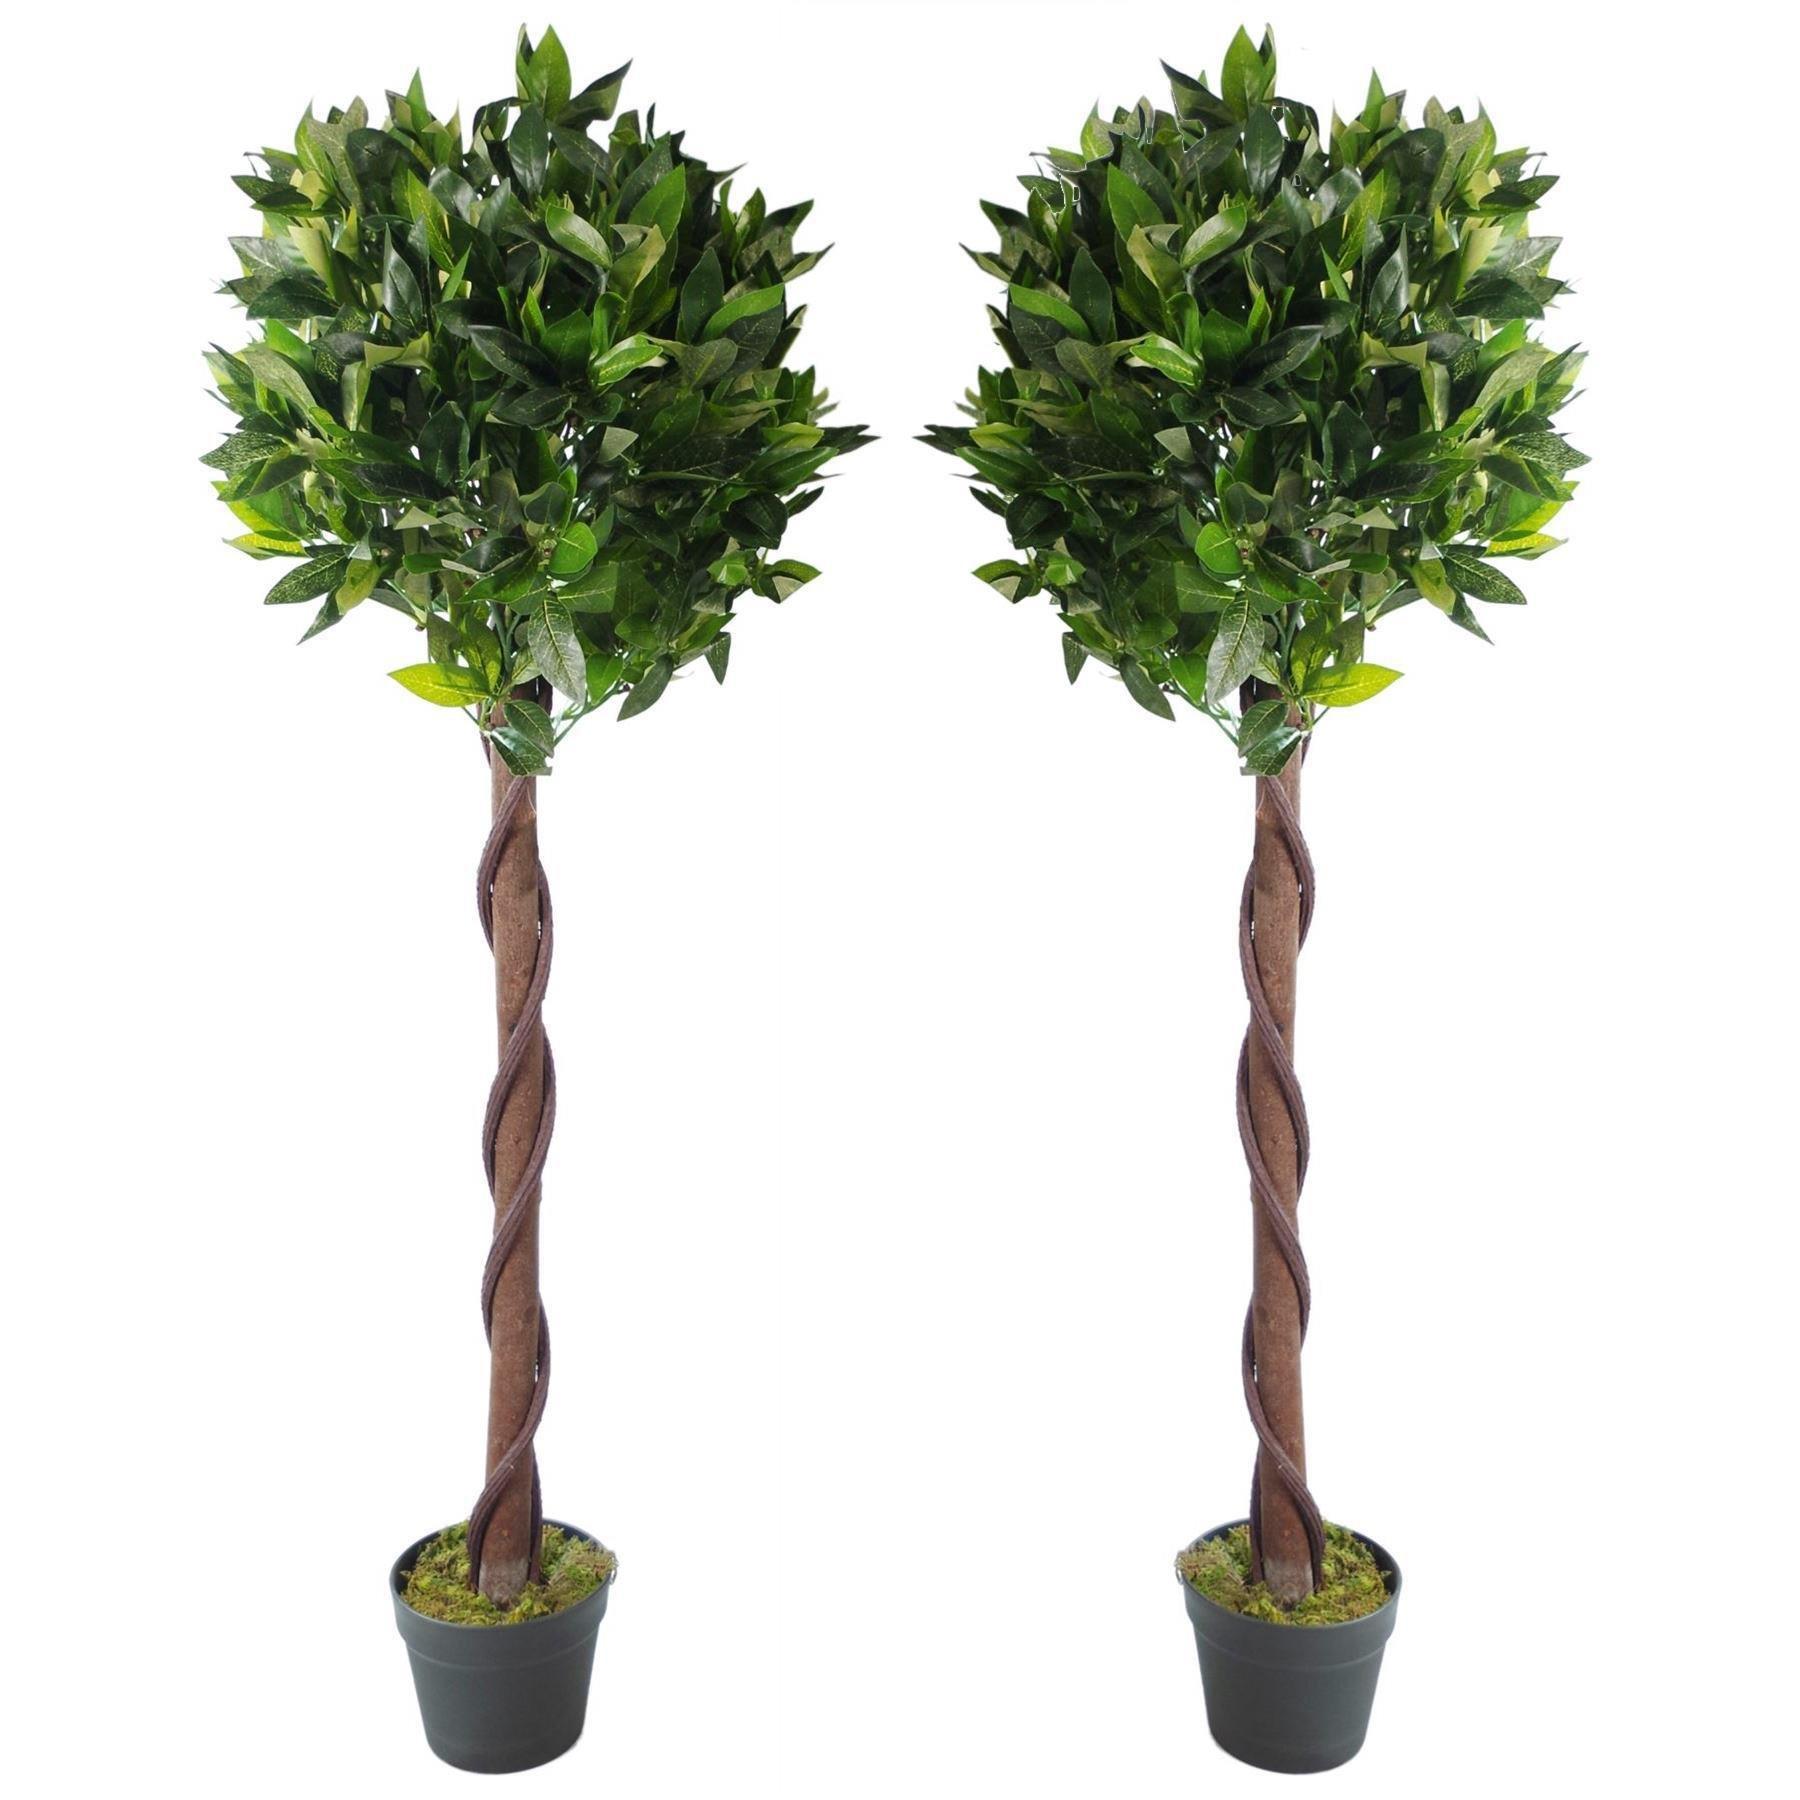 Pair of 120cm (4ft) Twisted Stem Artificial Topiary Bay Laurel Ball Trees